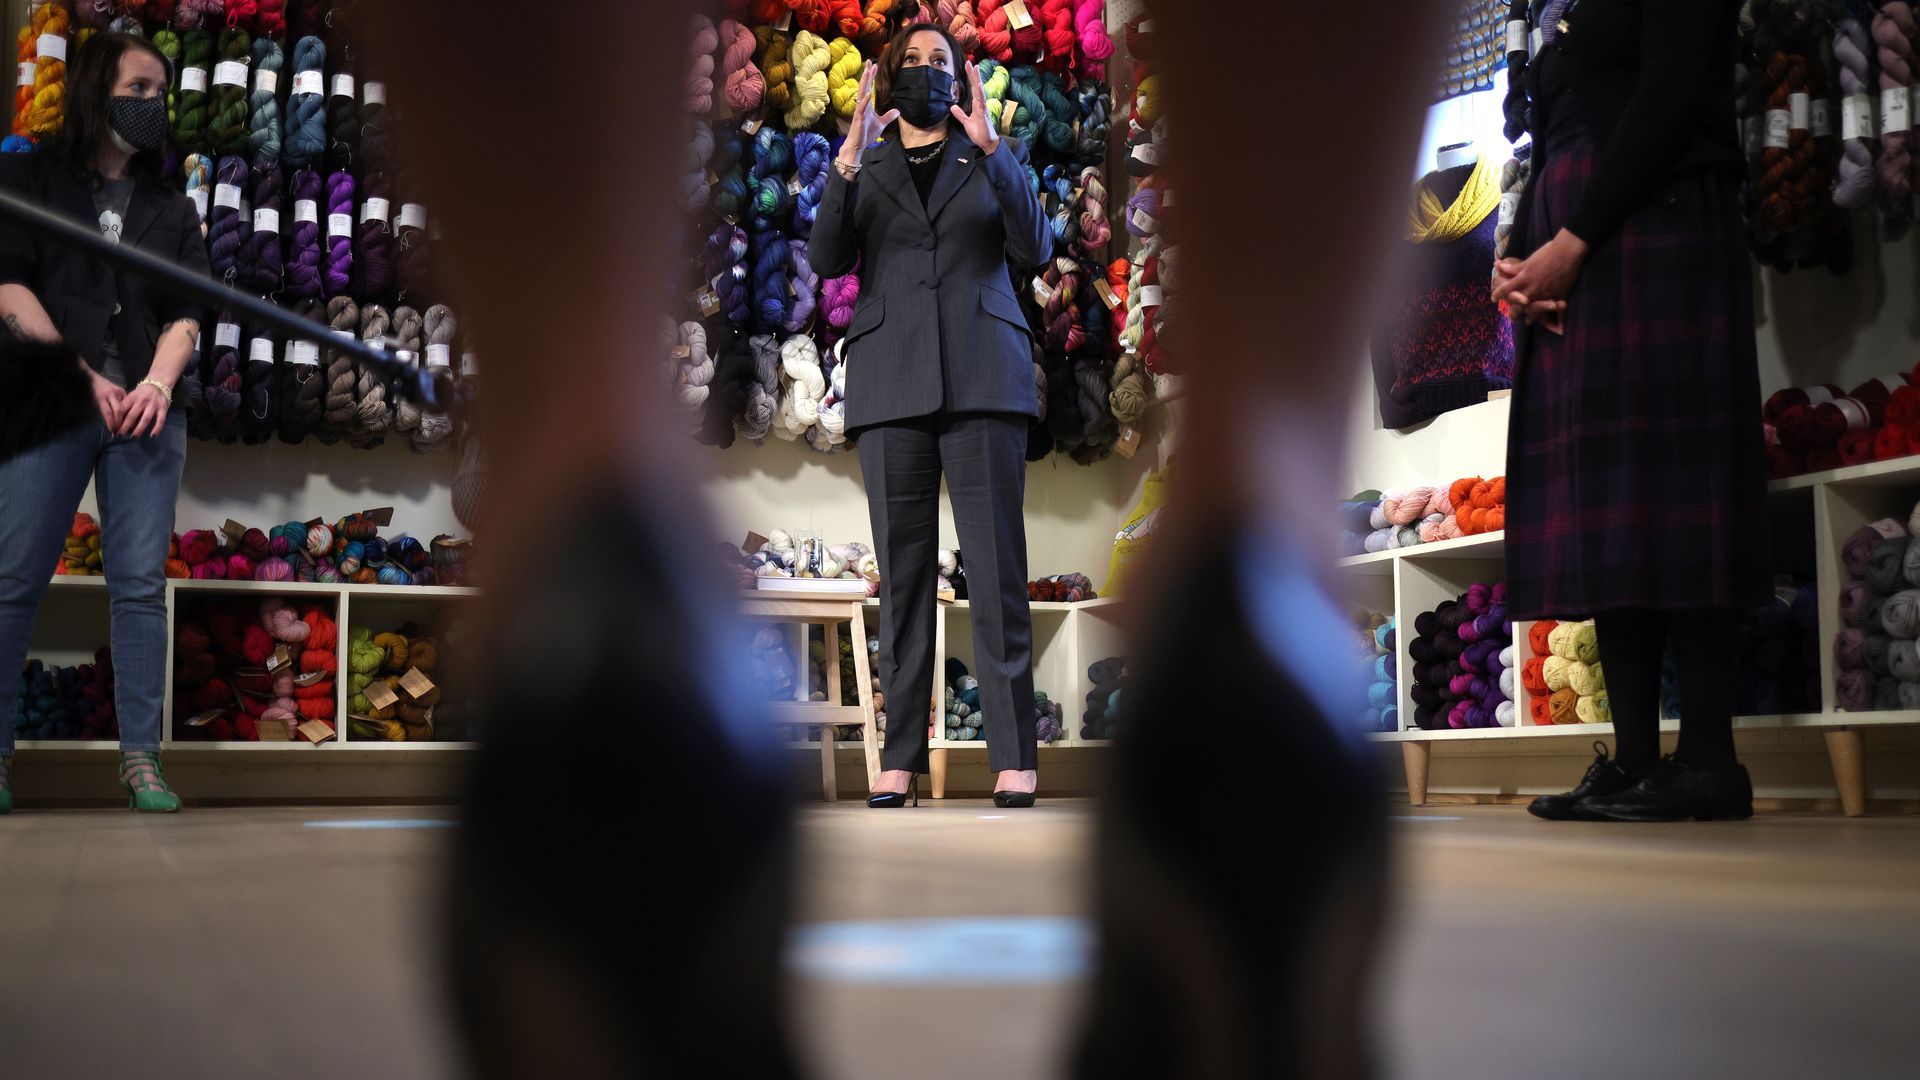 Vice President Kamala Harris is viewed between a pair of women's shoes as she addresses a small business event in Alexandria, Va.